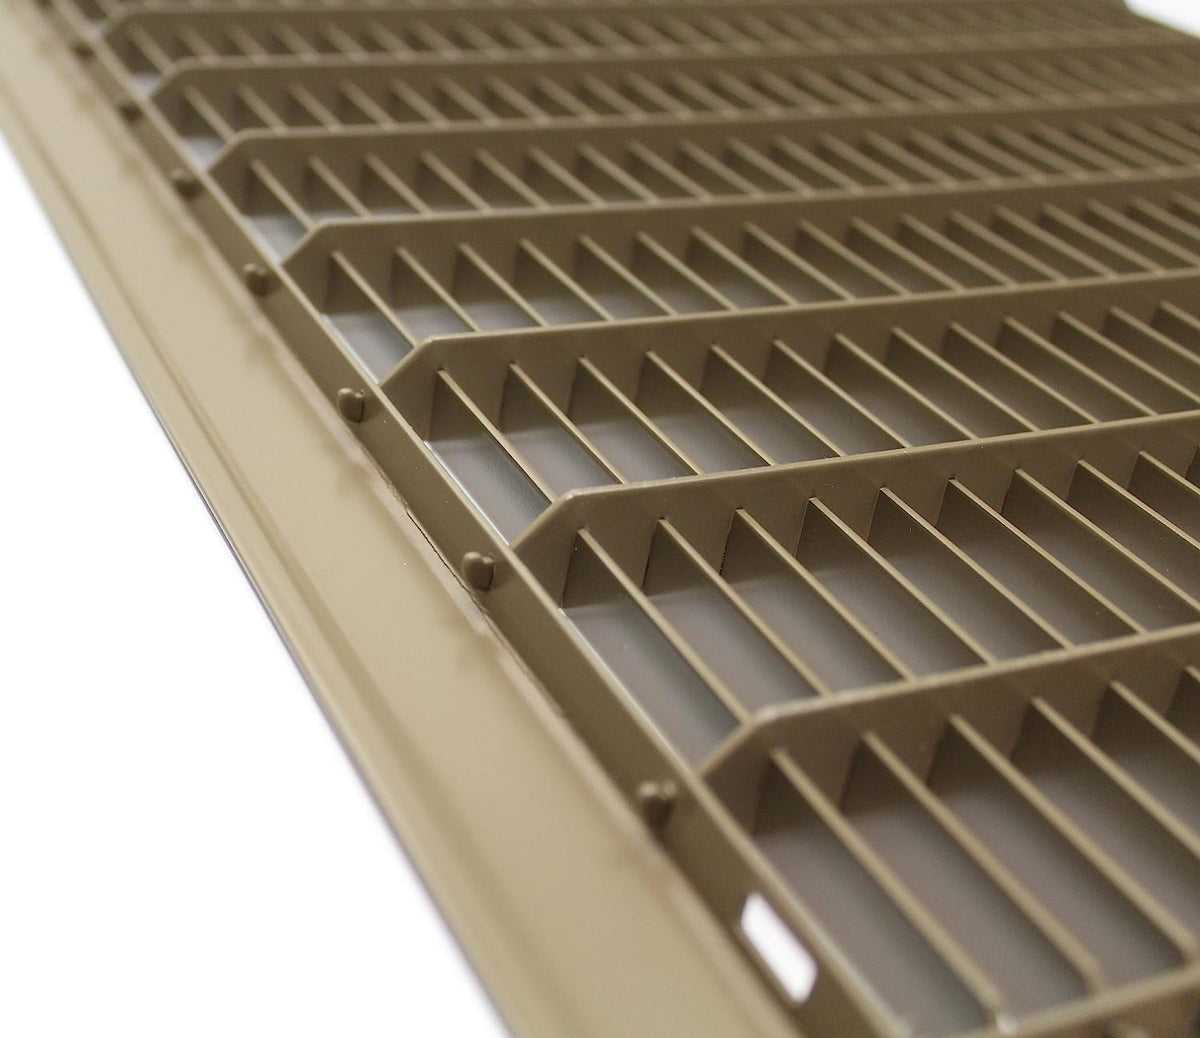 10&quot; X 10&quot; Heavy Duty Floor Grille - Fixed Blades Air Grille - Brown [Outer Dimensions: 11.75 X 11.75]